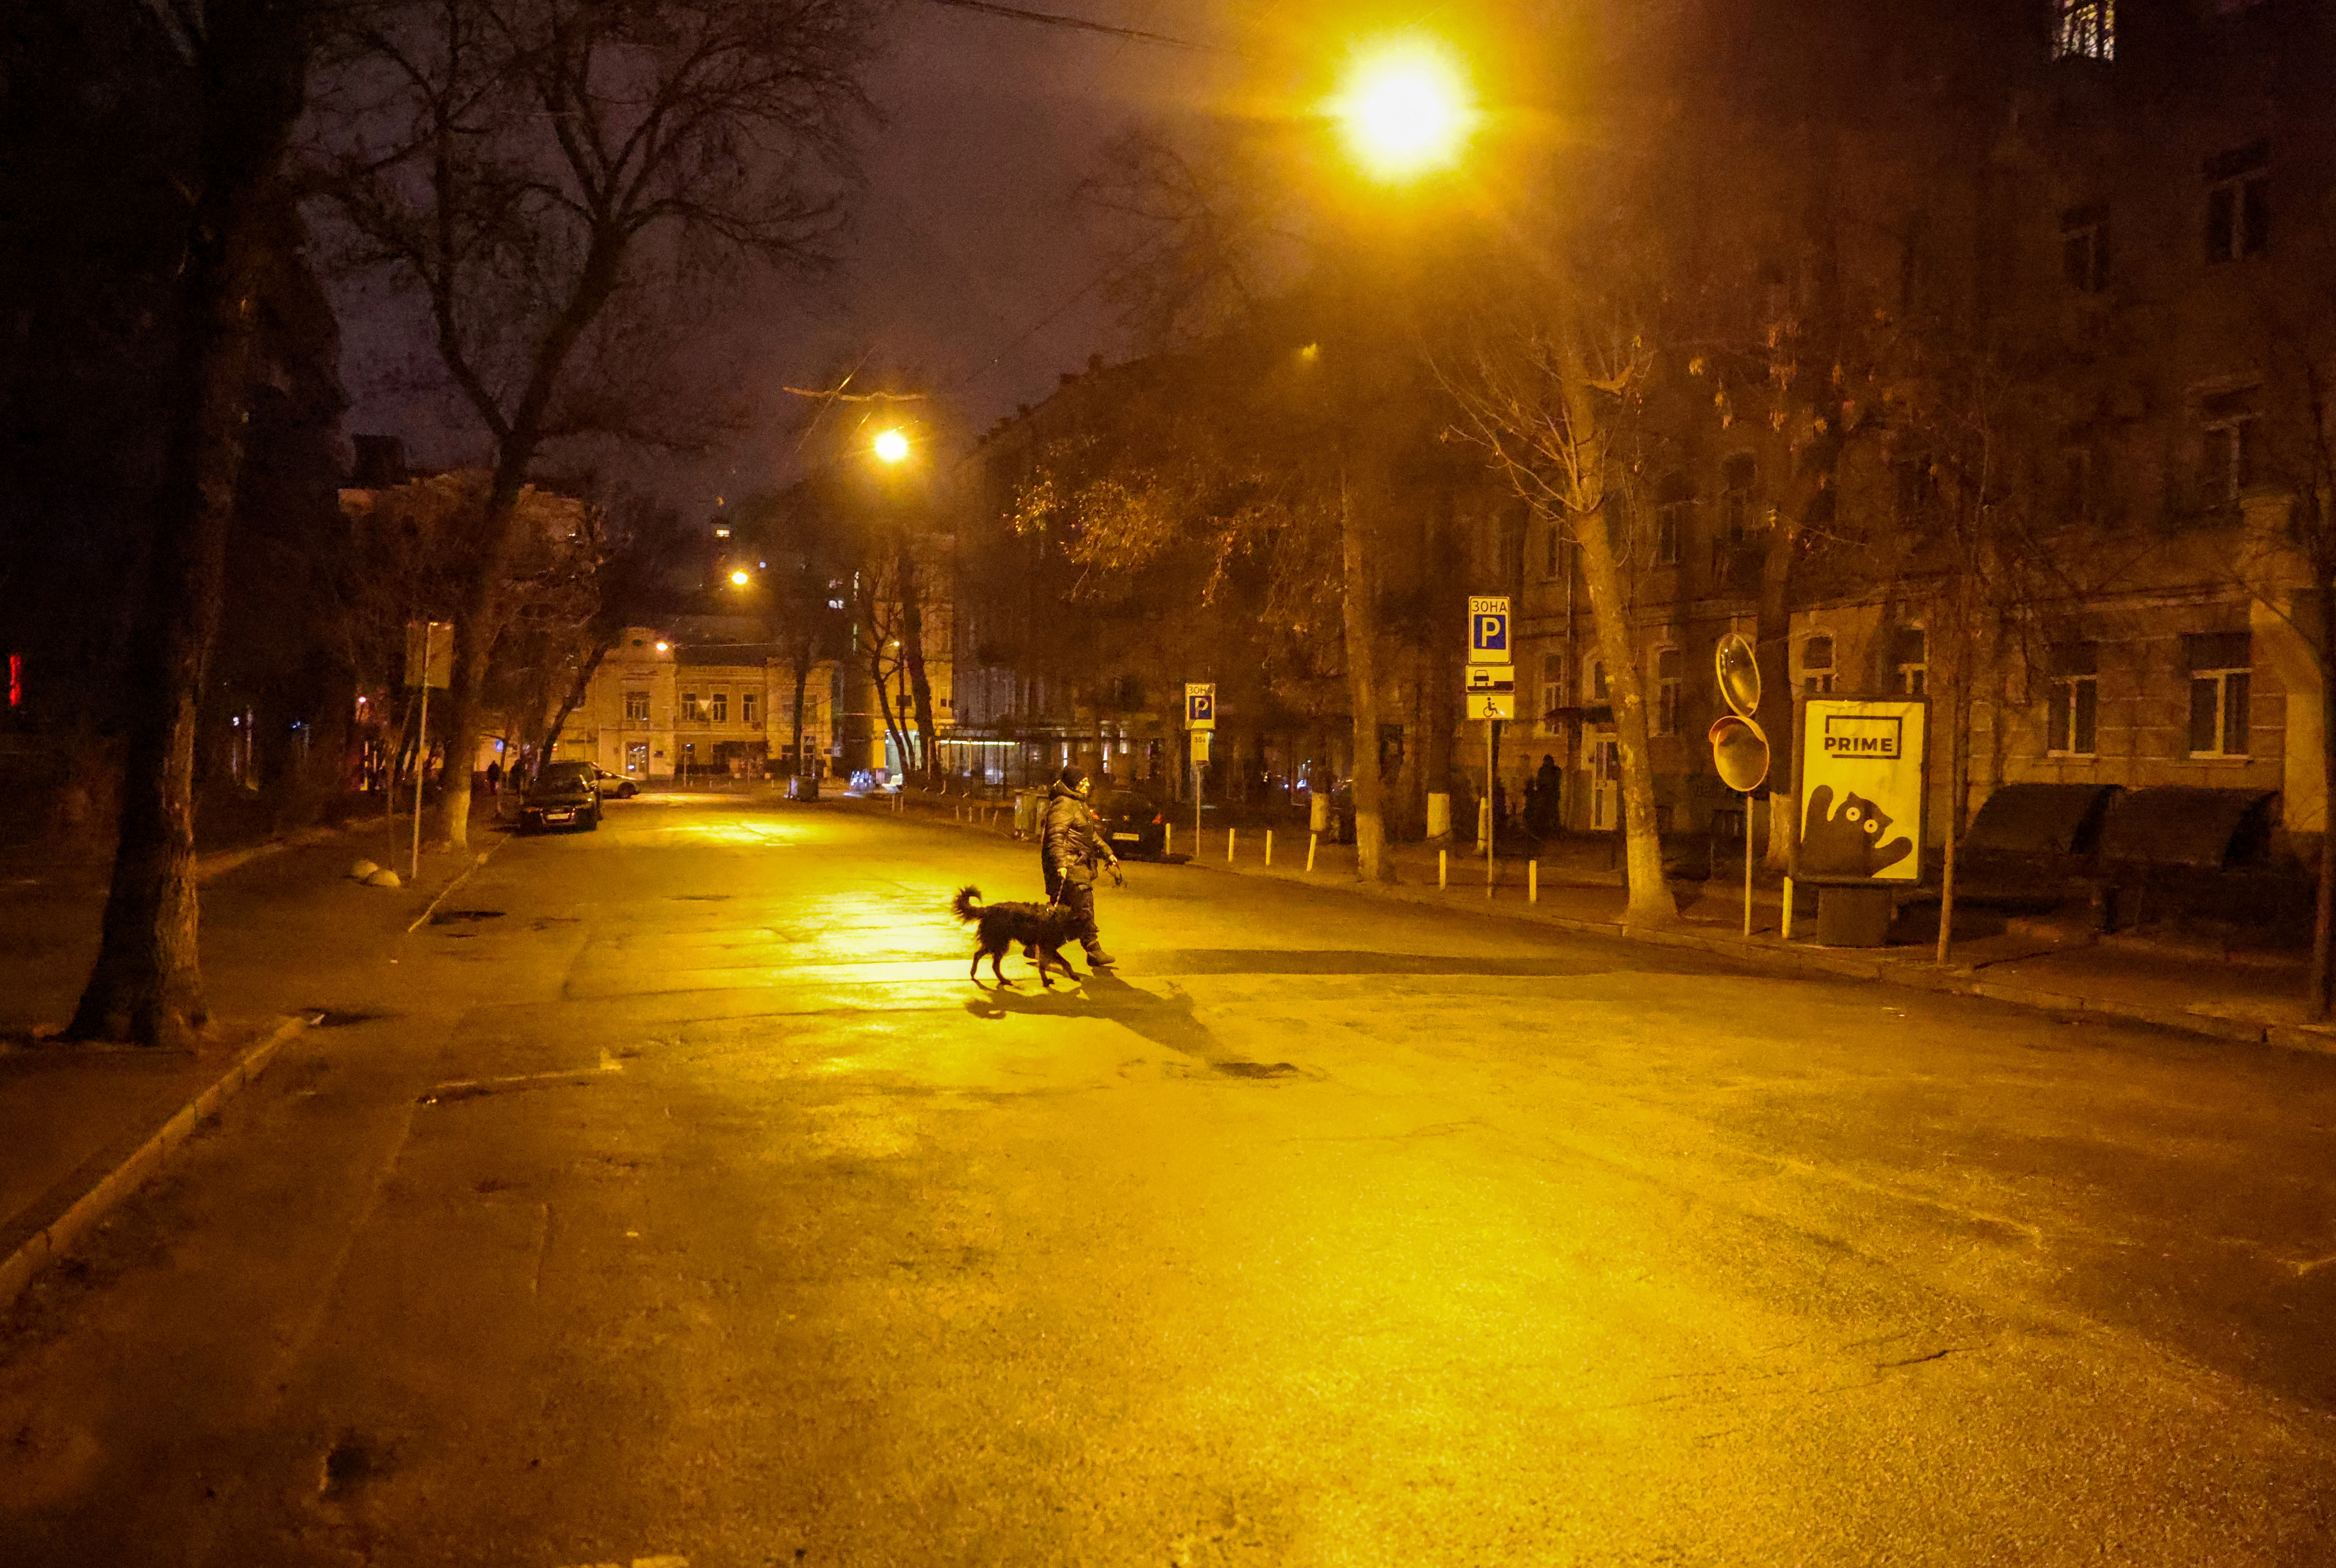 A woman walks along a deserted street with her dog a few hours before the curfew in Kyiv, Ukraine, February 24, 2022. REUTERS/Umit Bektas